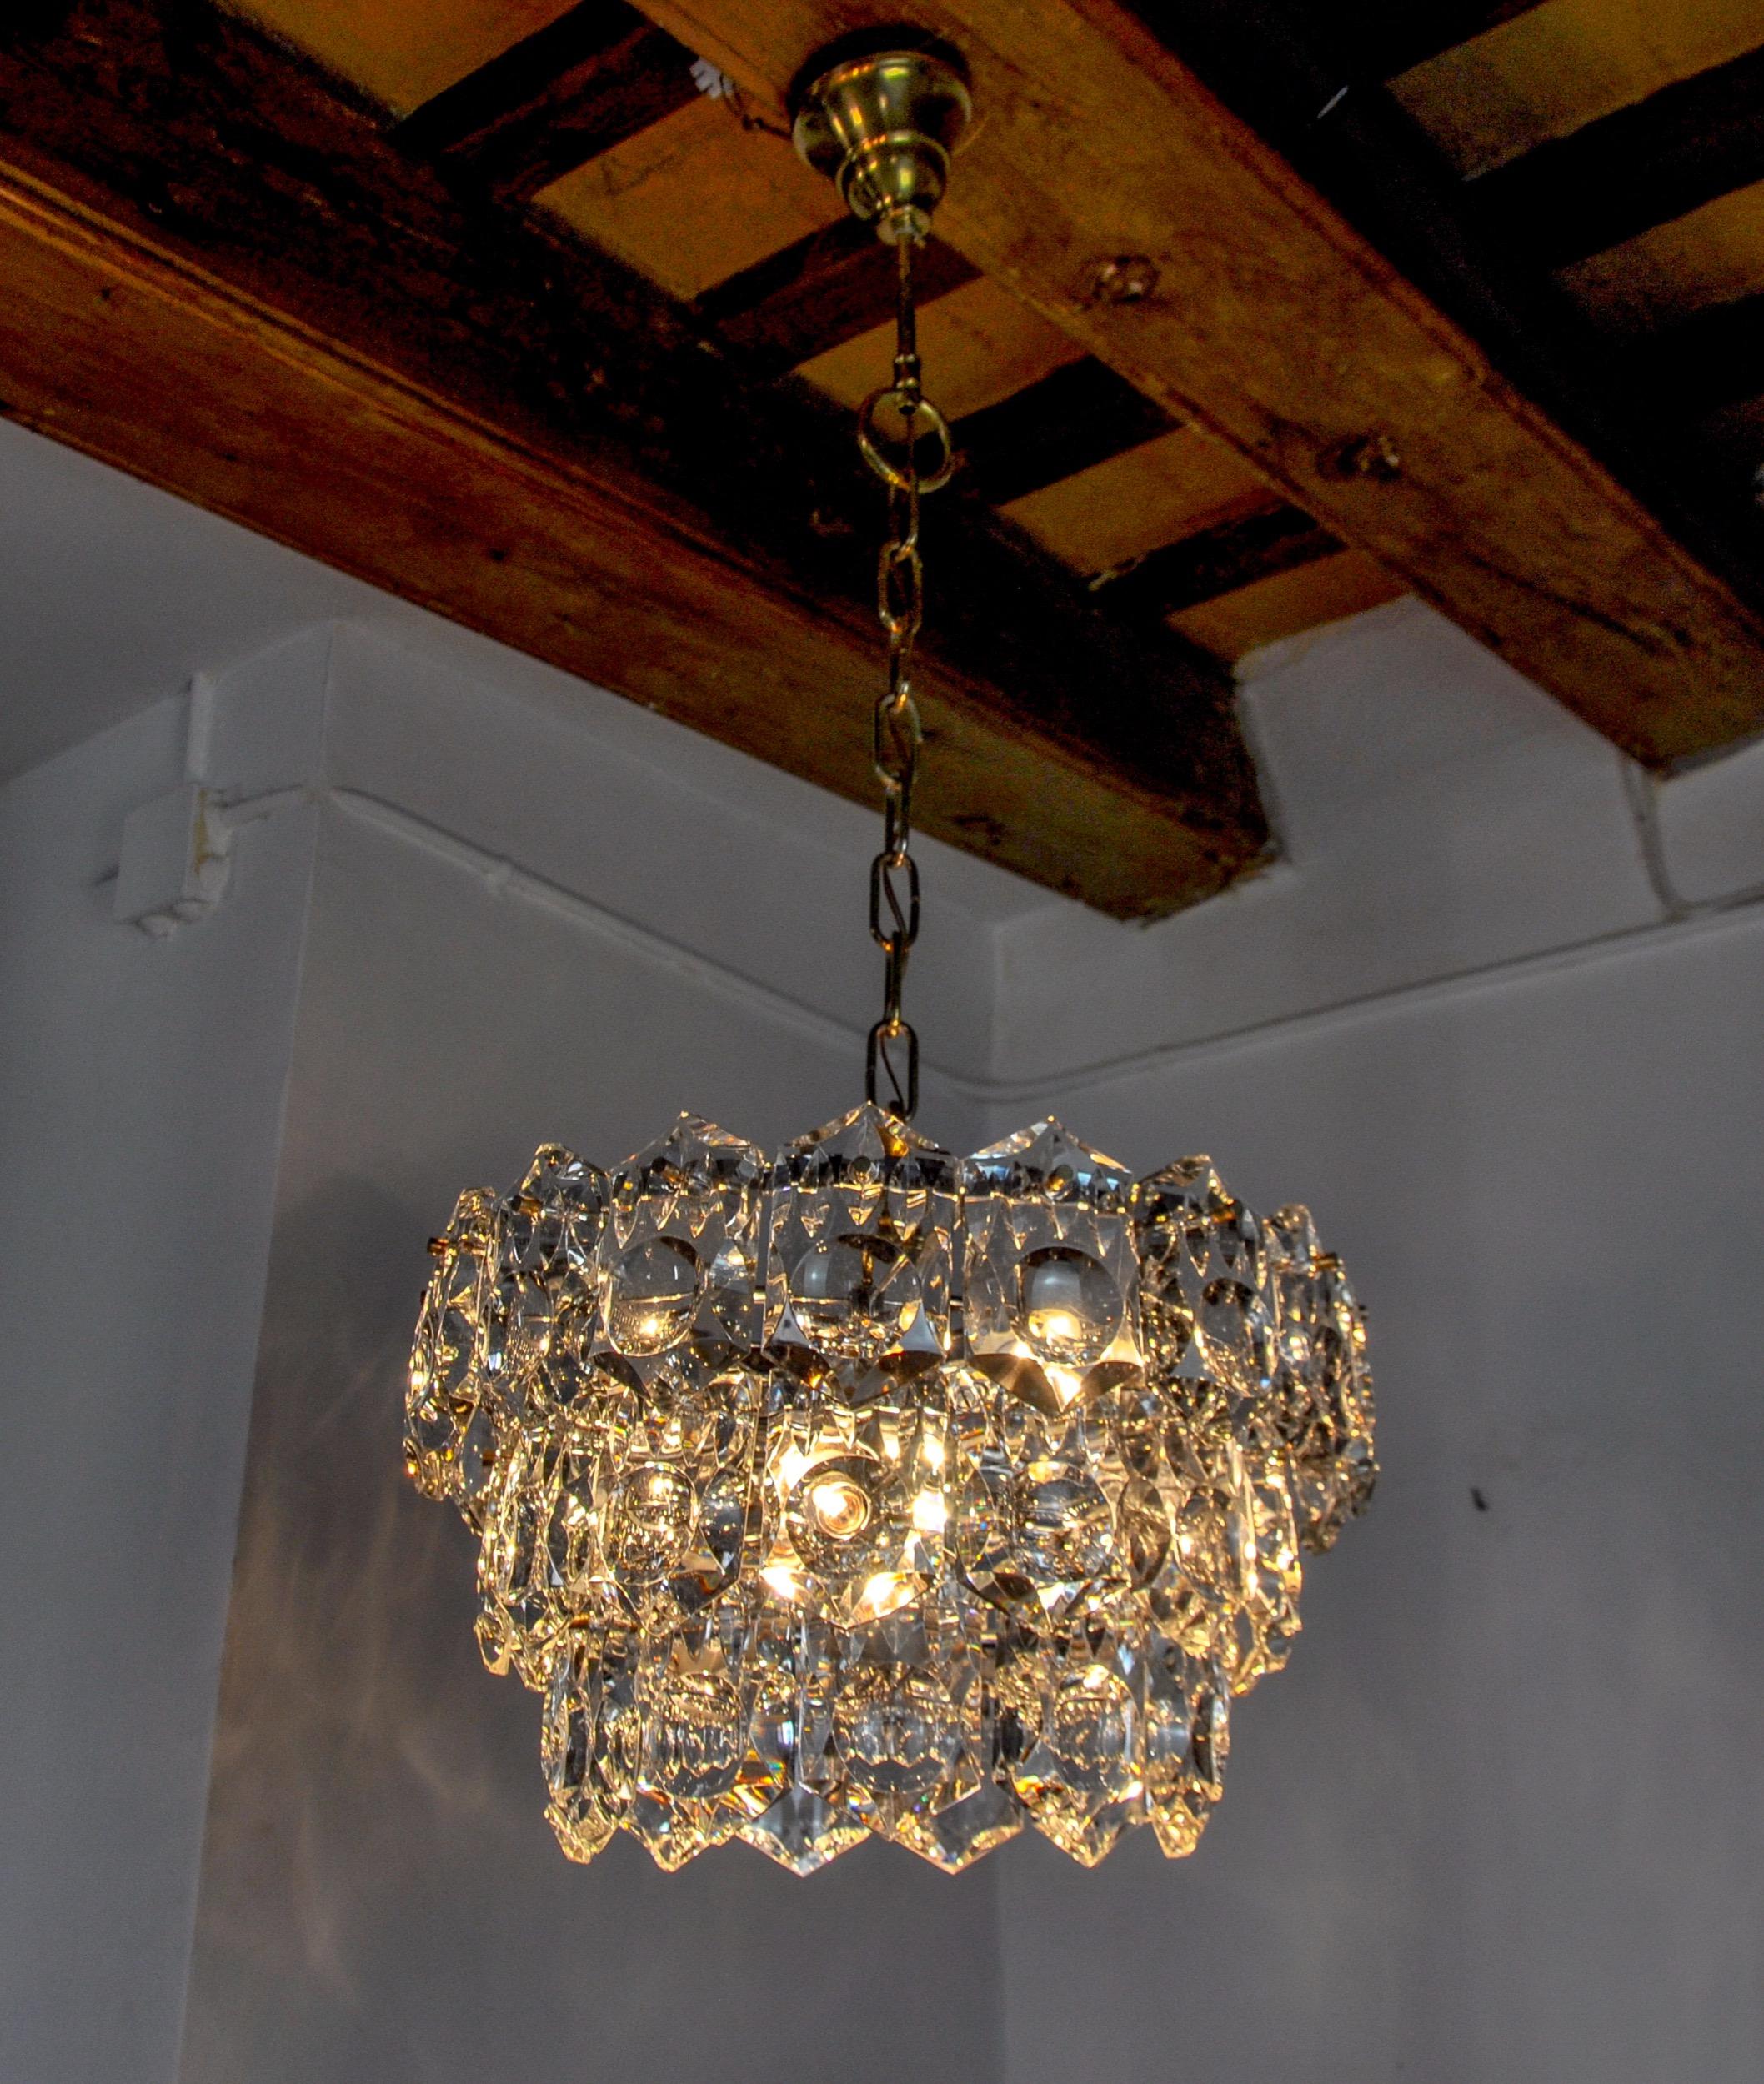 Beautiful and rare kinkeldey chandelier dating from the 70s designated and produced in germany. Composed of crystals cut with magnifying glass effect and a chromed metal structure spread over 43 levels with gold chain. This chandelier is